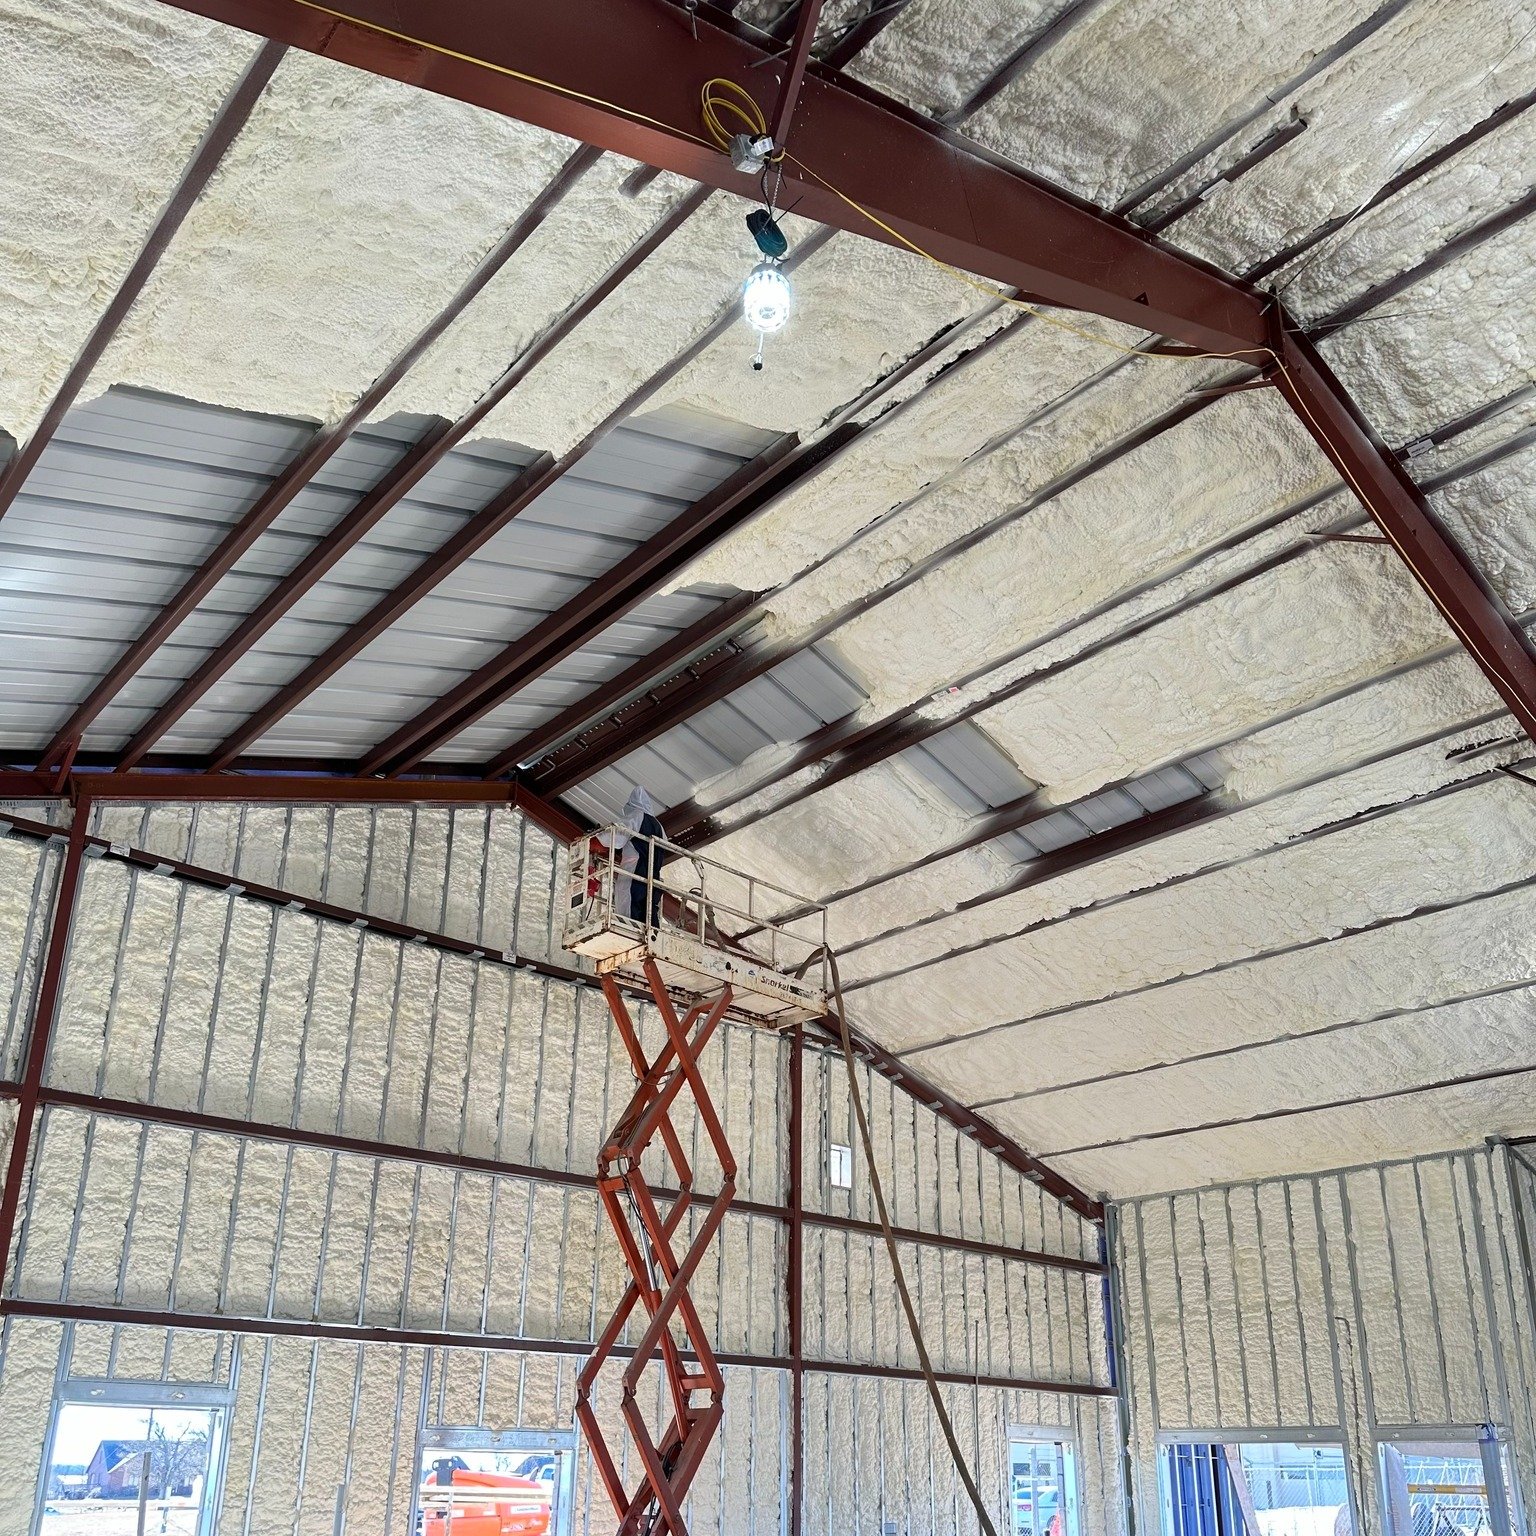 ✨Another successful spray foam insulation project completed!
-
Our team at InsulUSA just wrapped up this large-scale project, and we couldn't be more thrilled with the results. If you're considering spray foam insulation, why not go with the best? Ou